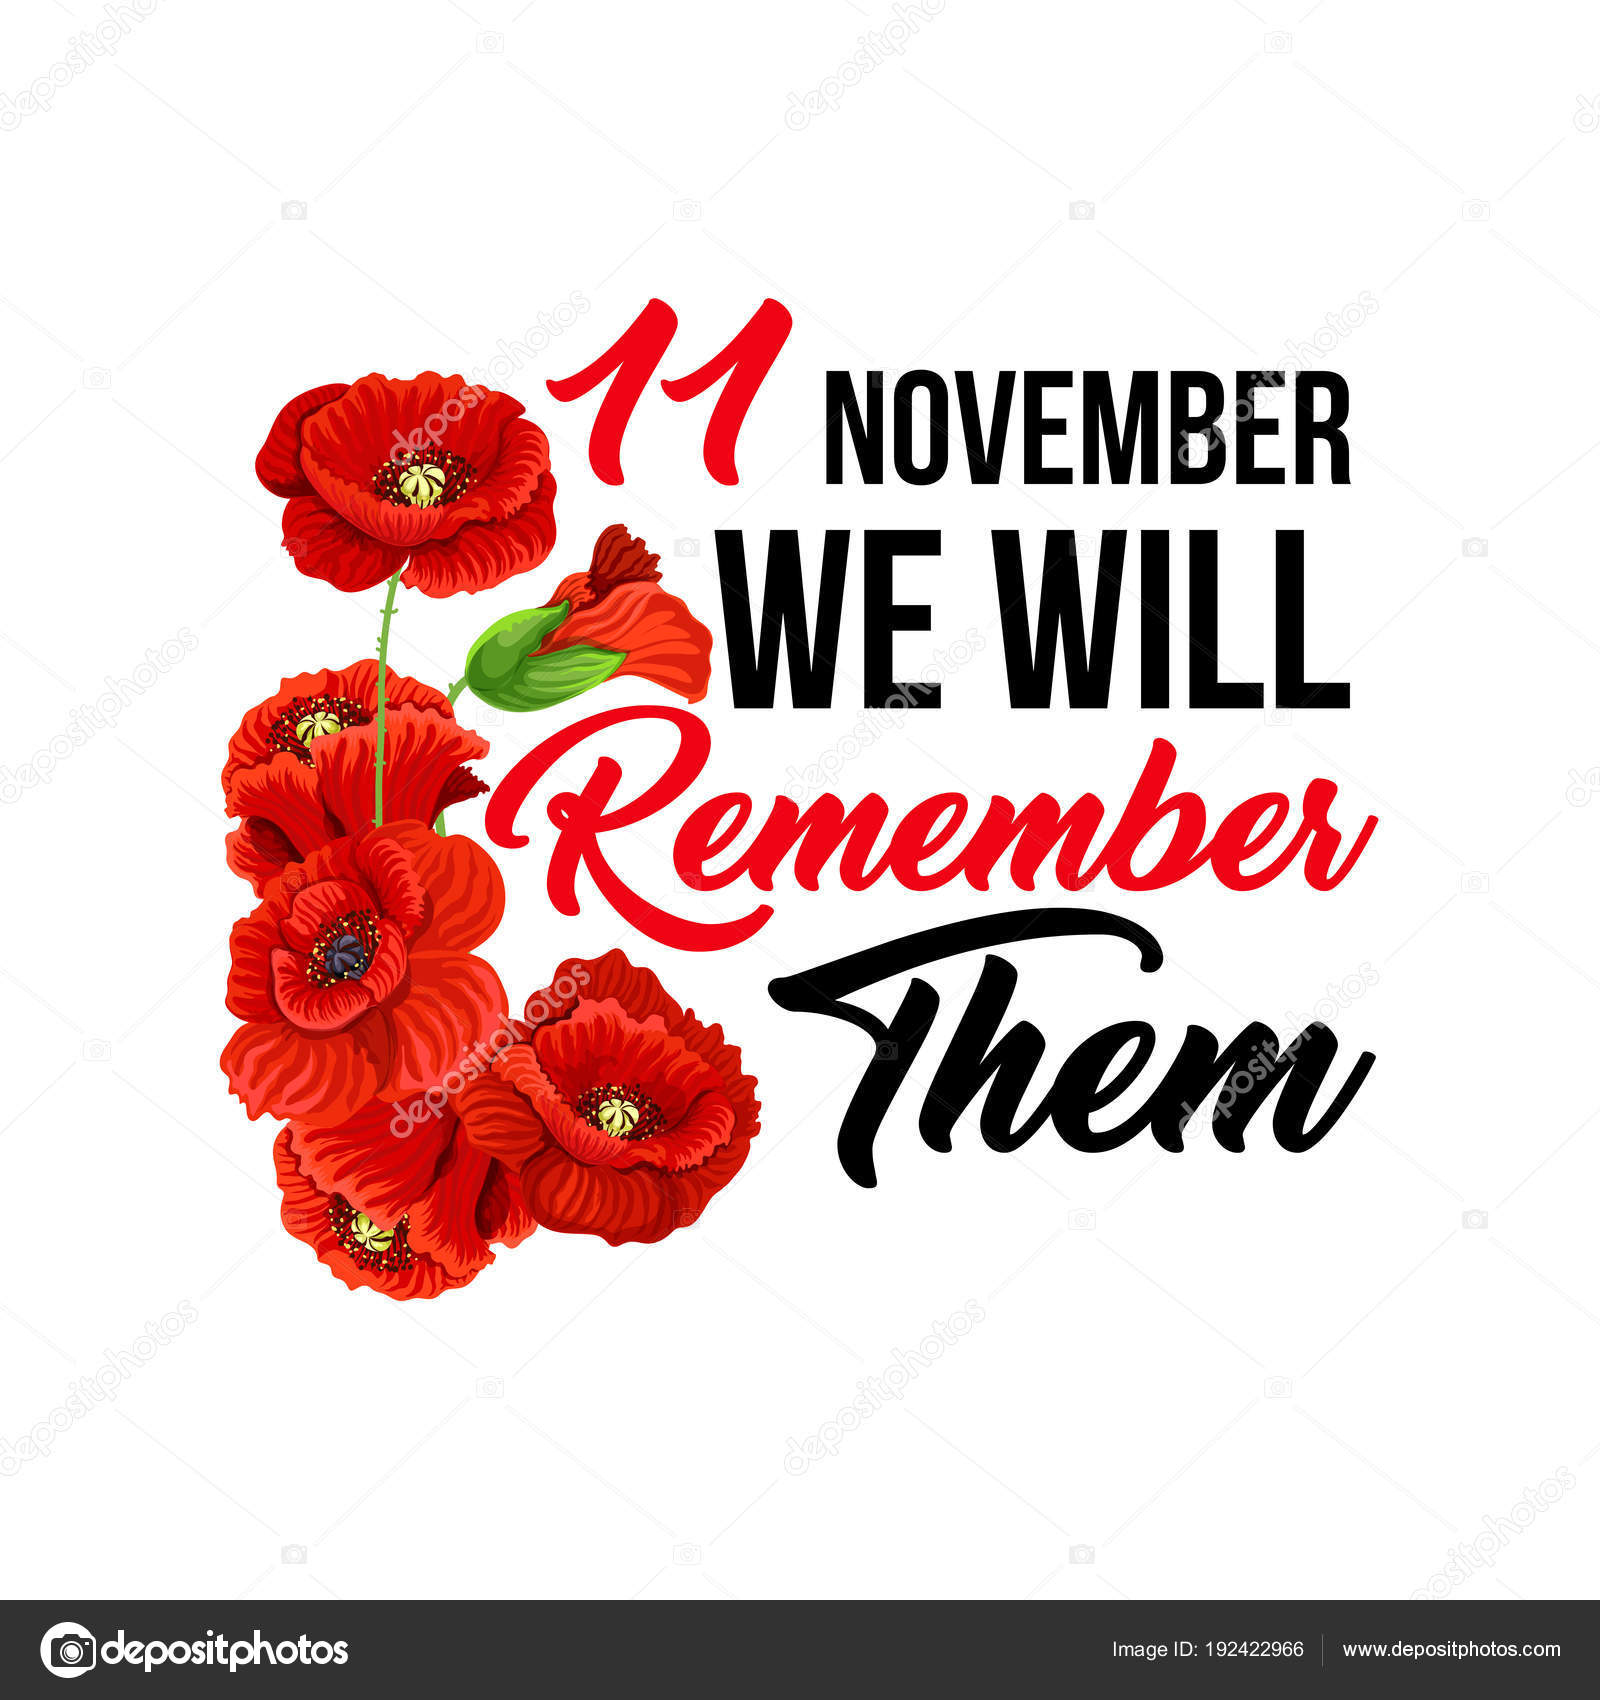 Lest We Forget Red Poppy Day November 11 Remembrance Armistice Day Sticker